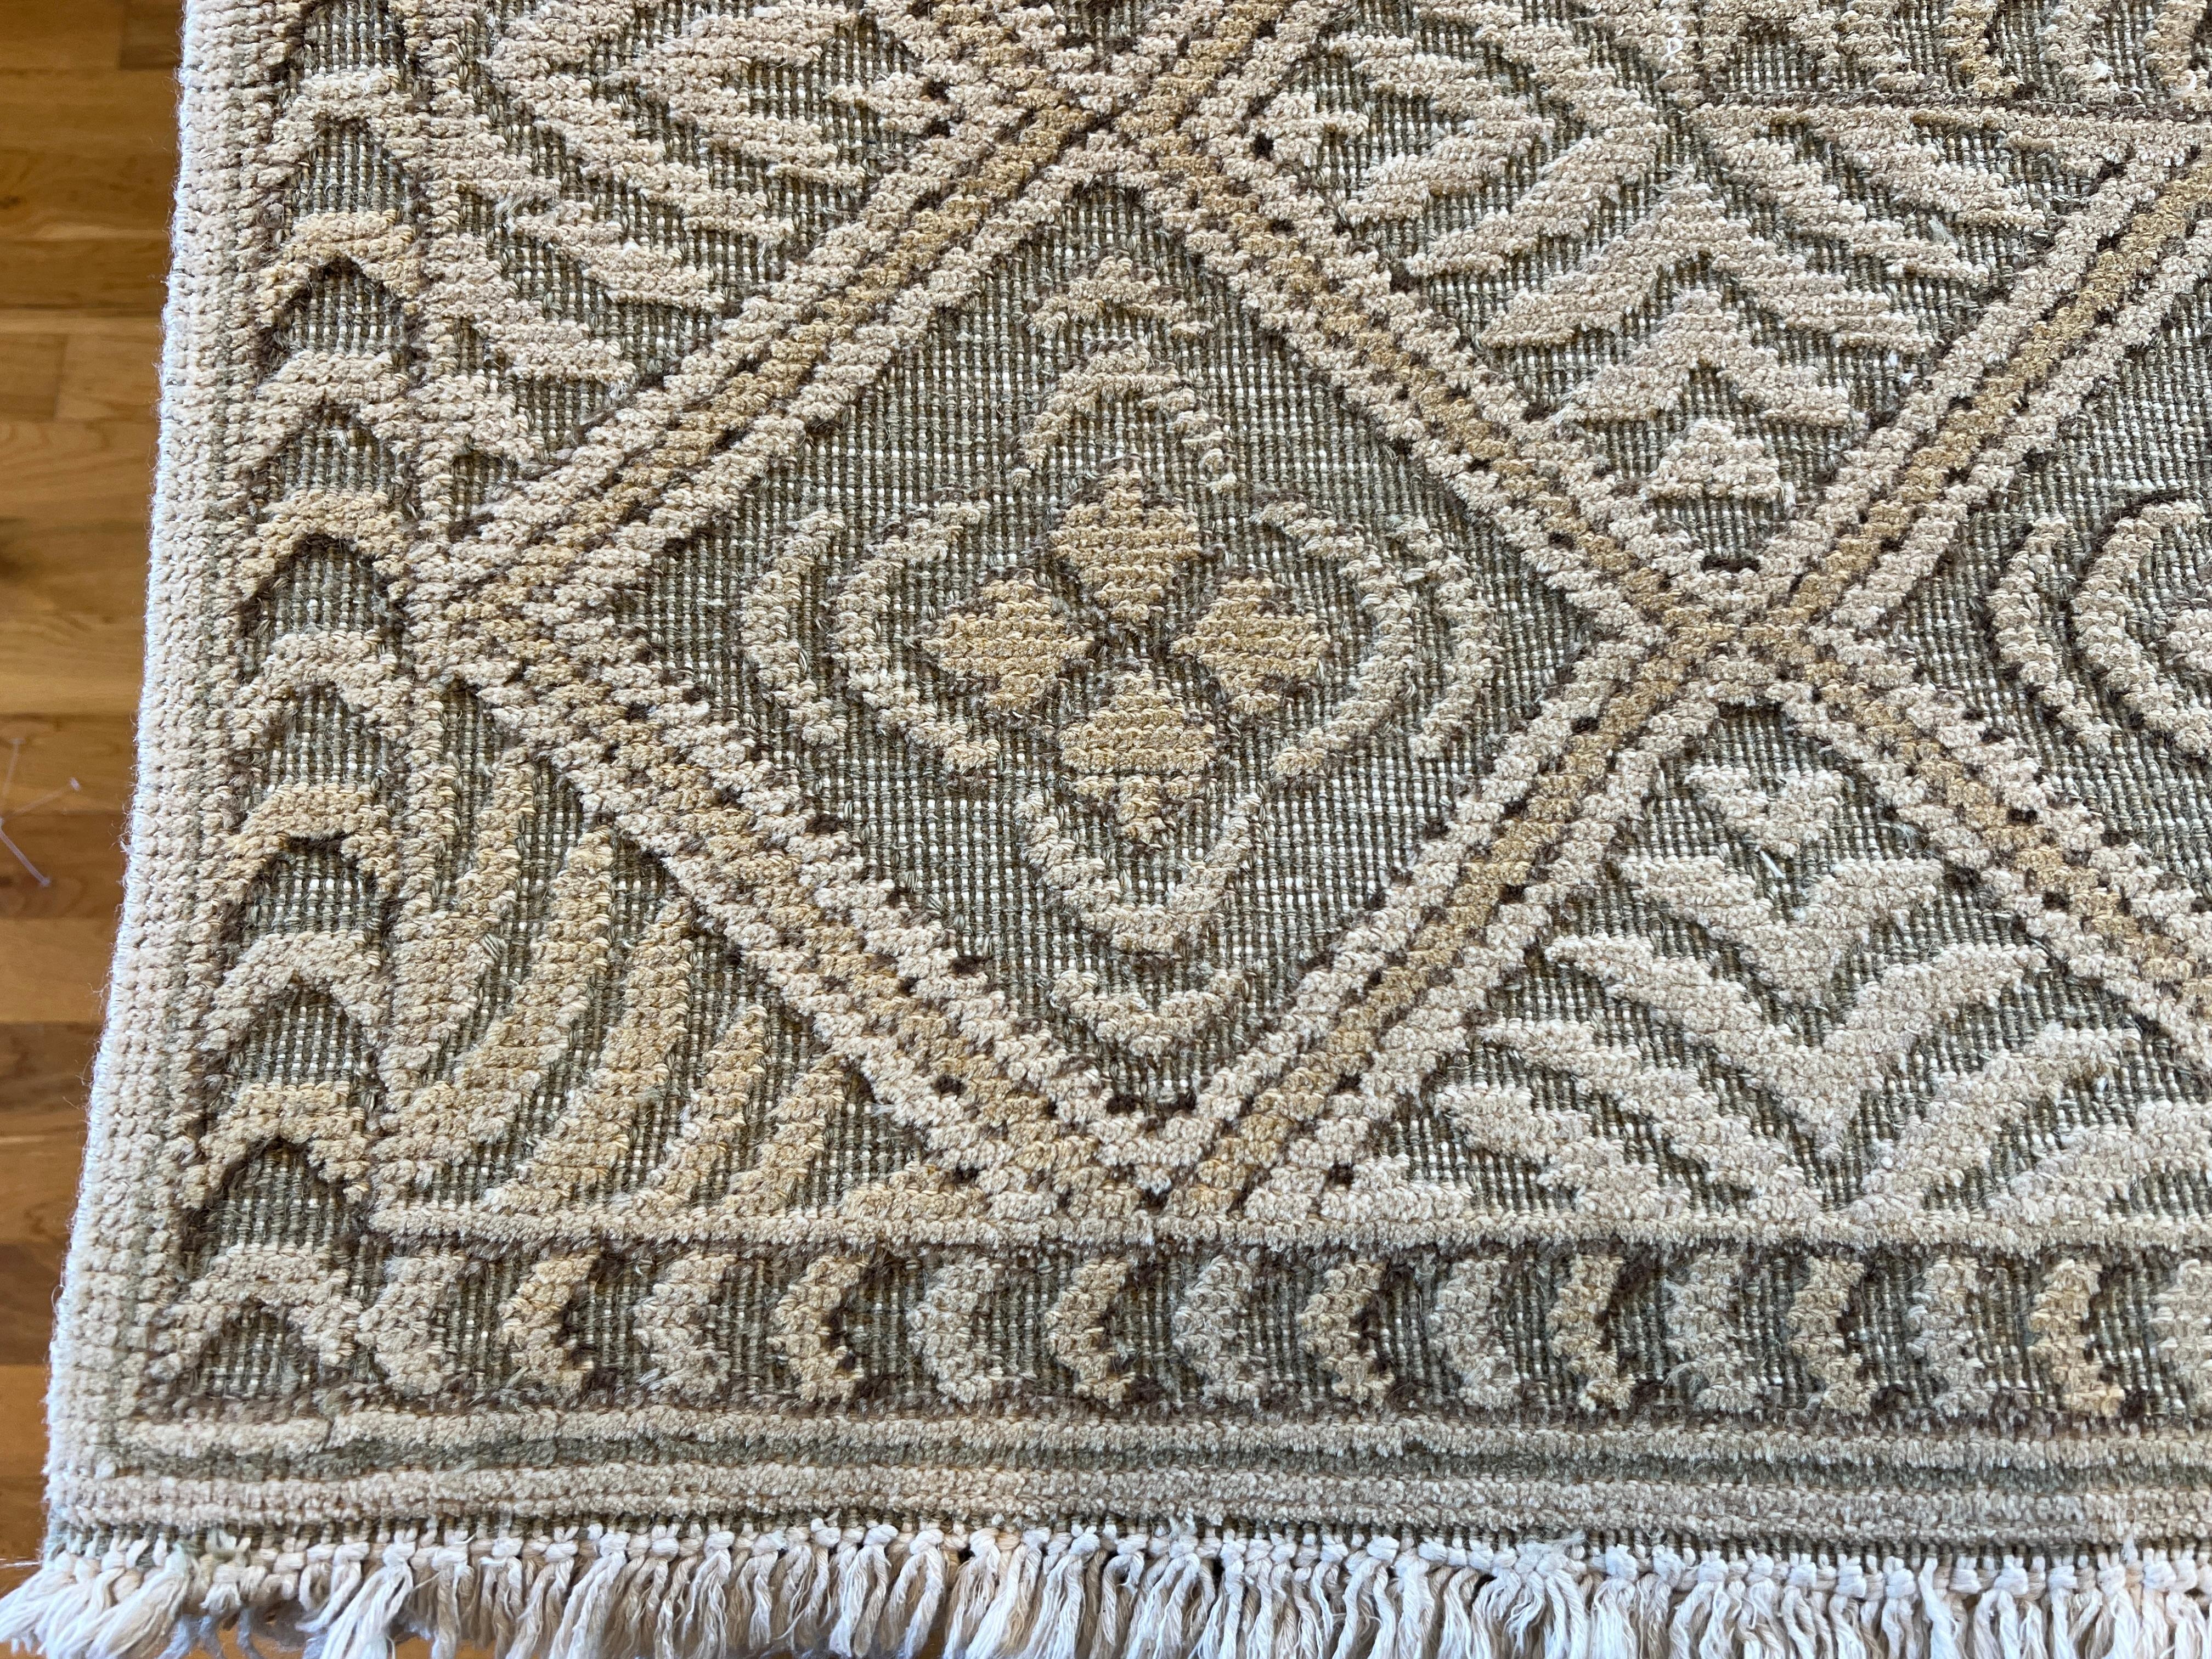 9'x12' French Floral Inspired Hand-Knotted Wool Rug In New Condition For Sale In Los Angeles, CA